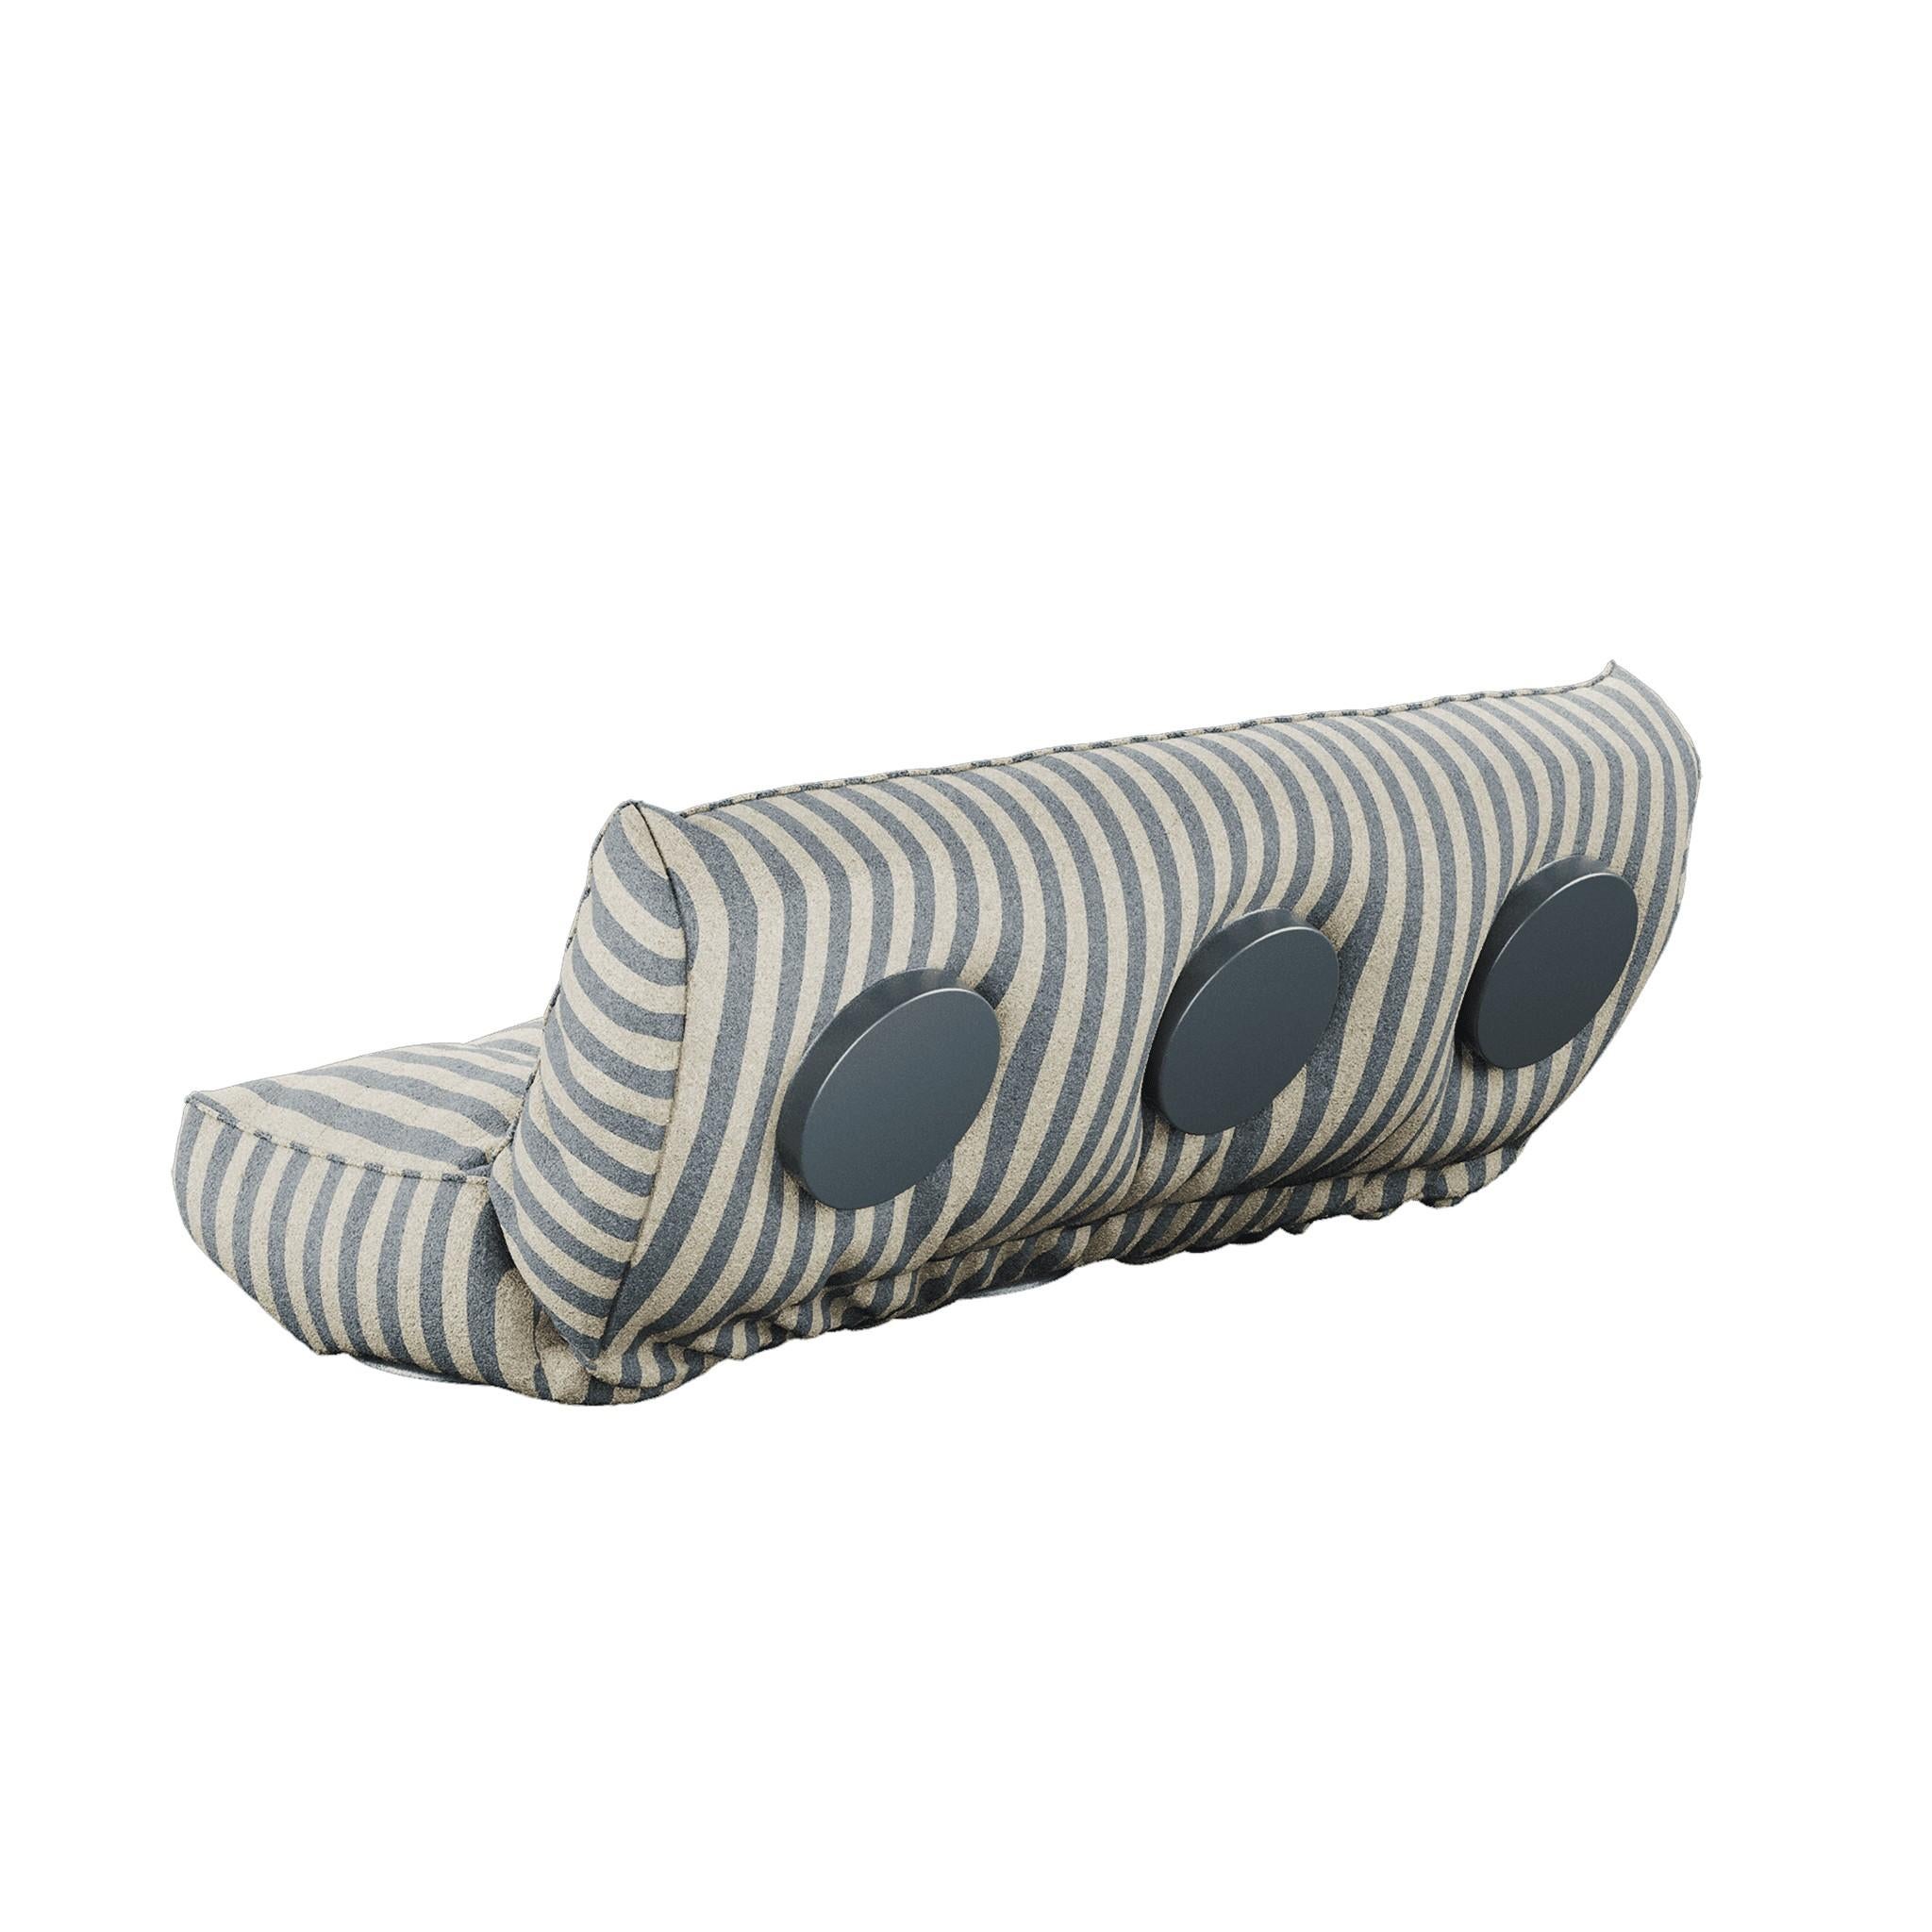 Contemporary Modern Outdoor Sofa Folding Daybed Upholstered in Outdoor Blue Striped Fabric For Sale